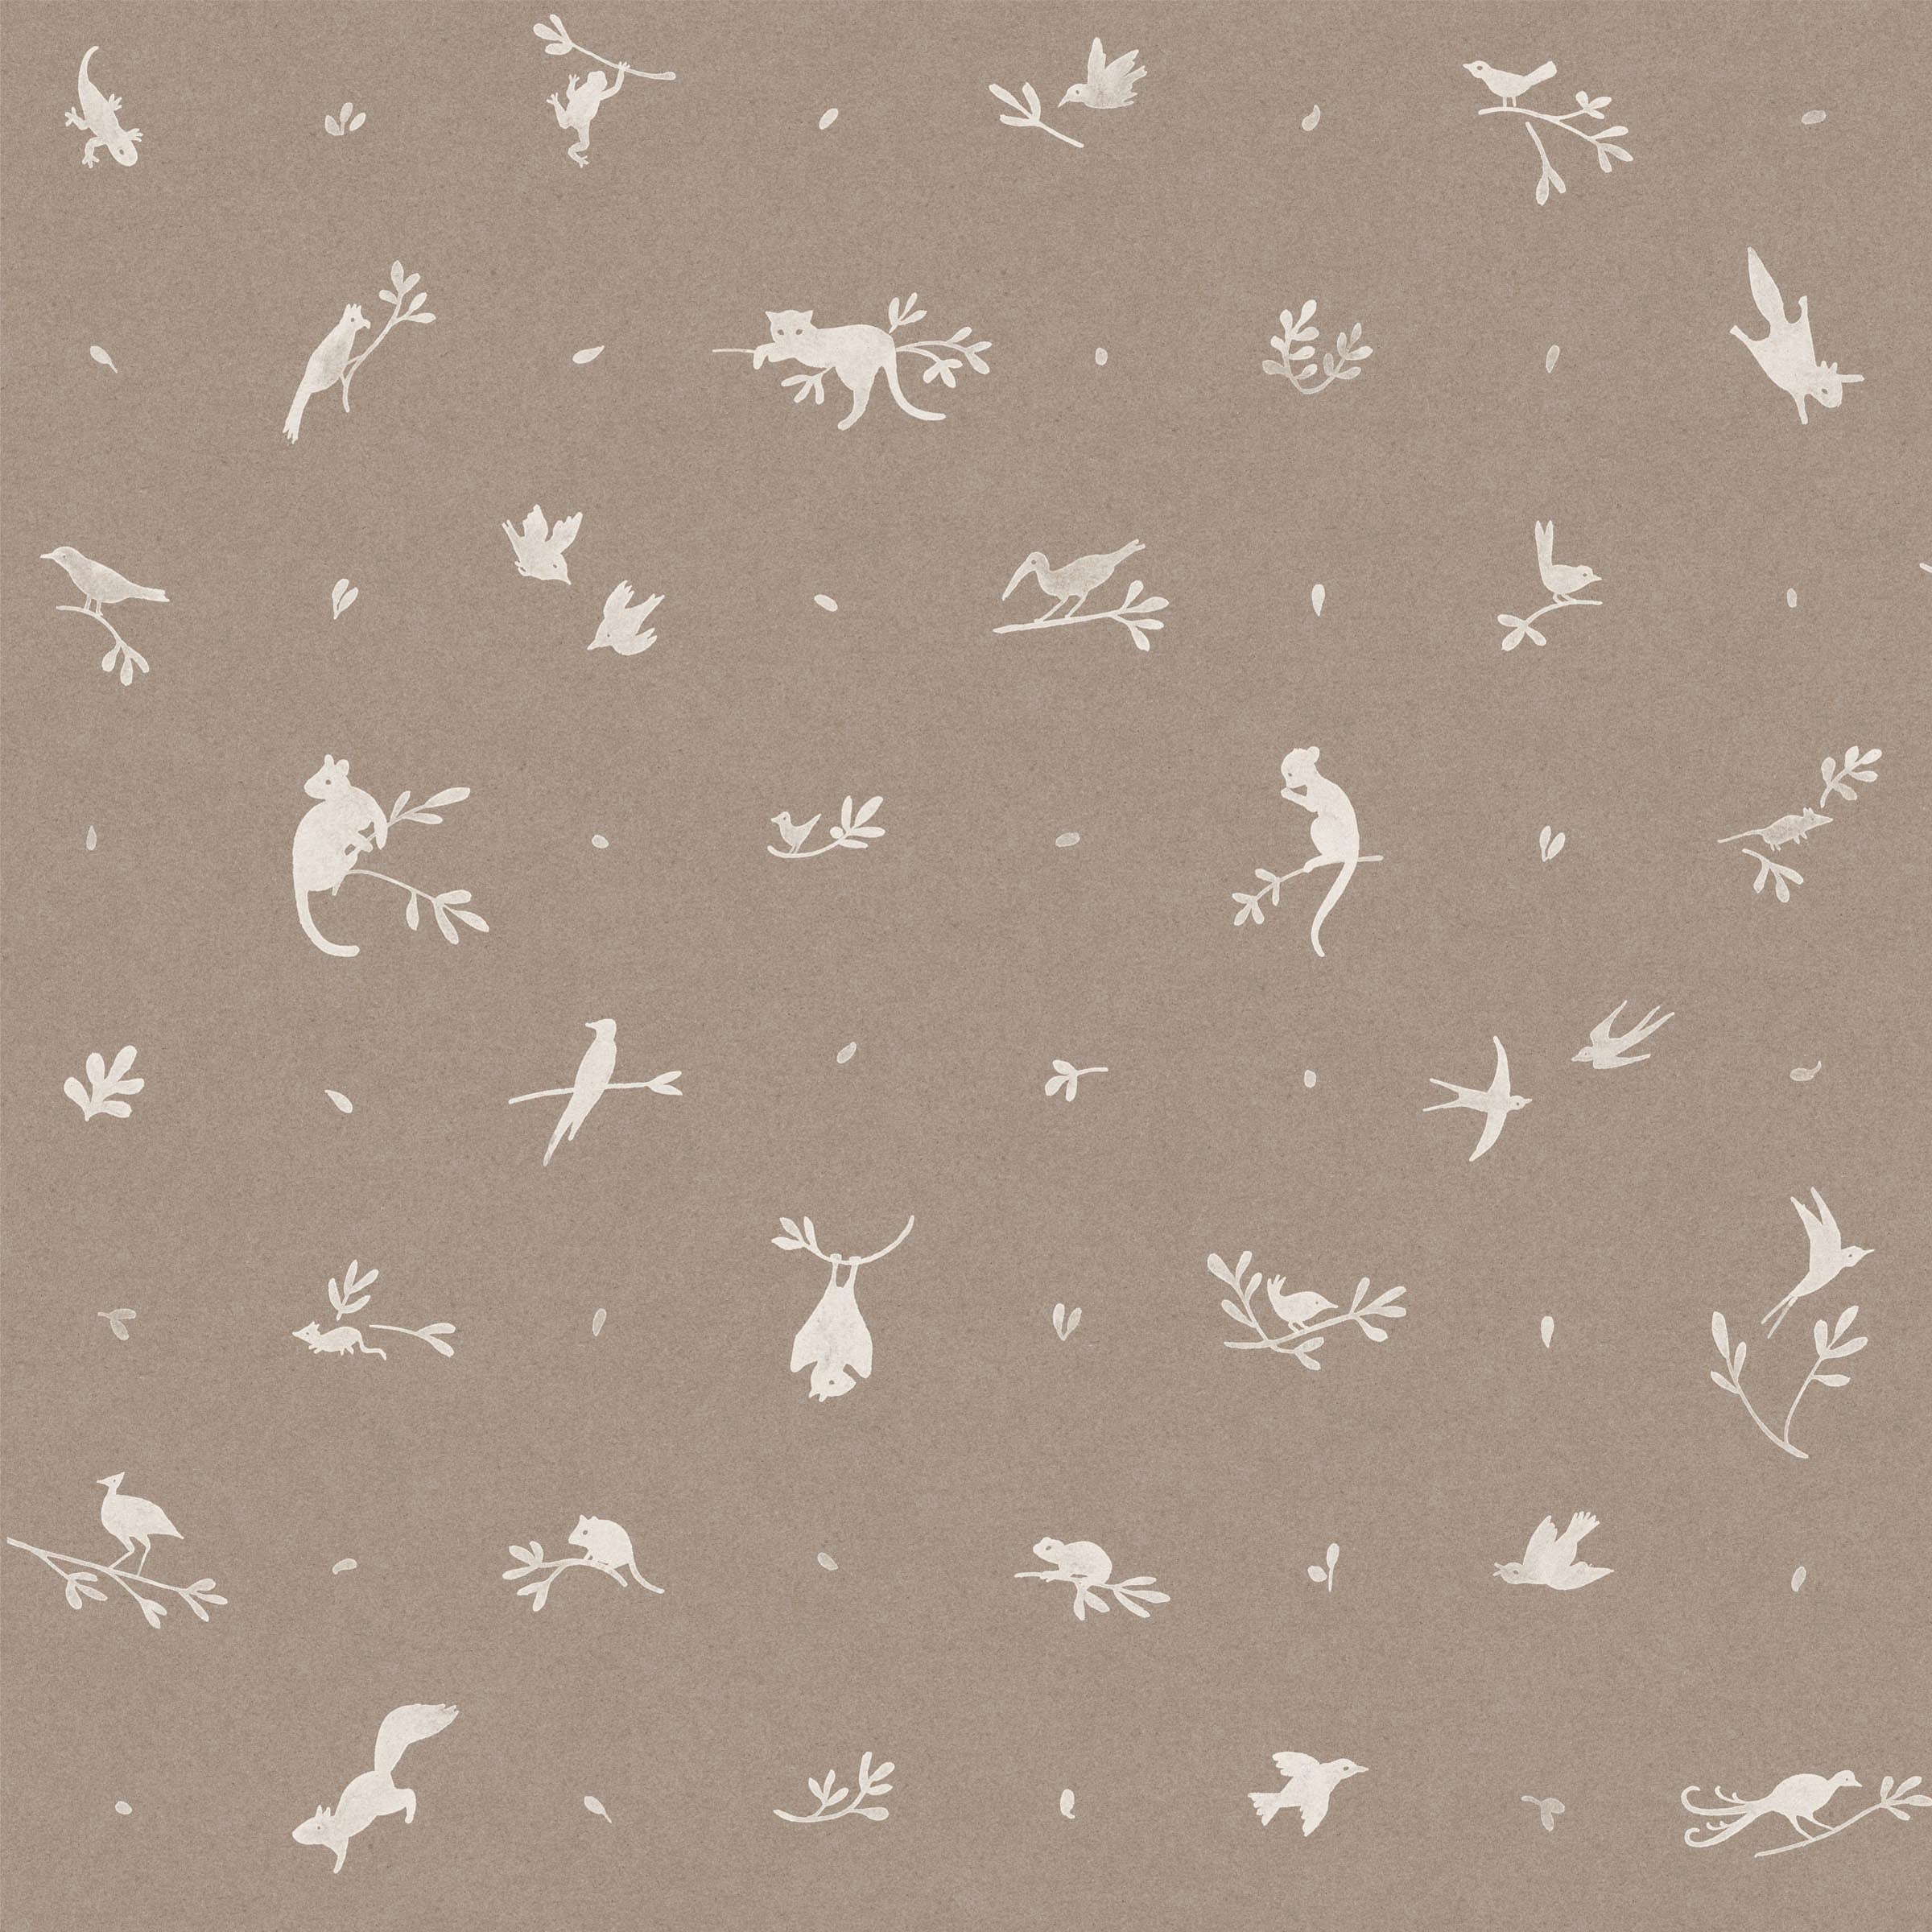 Detail of fabric in a playful animal and branch print in cream on a brown field.